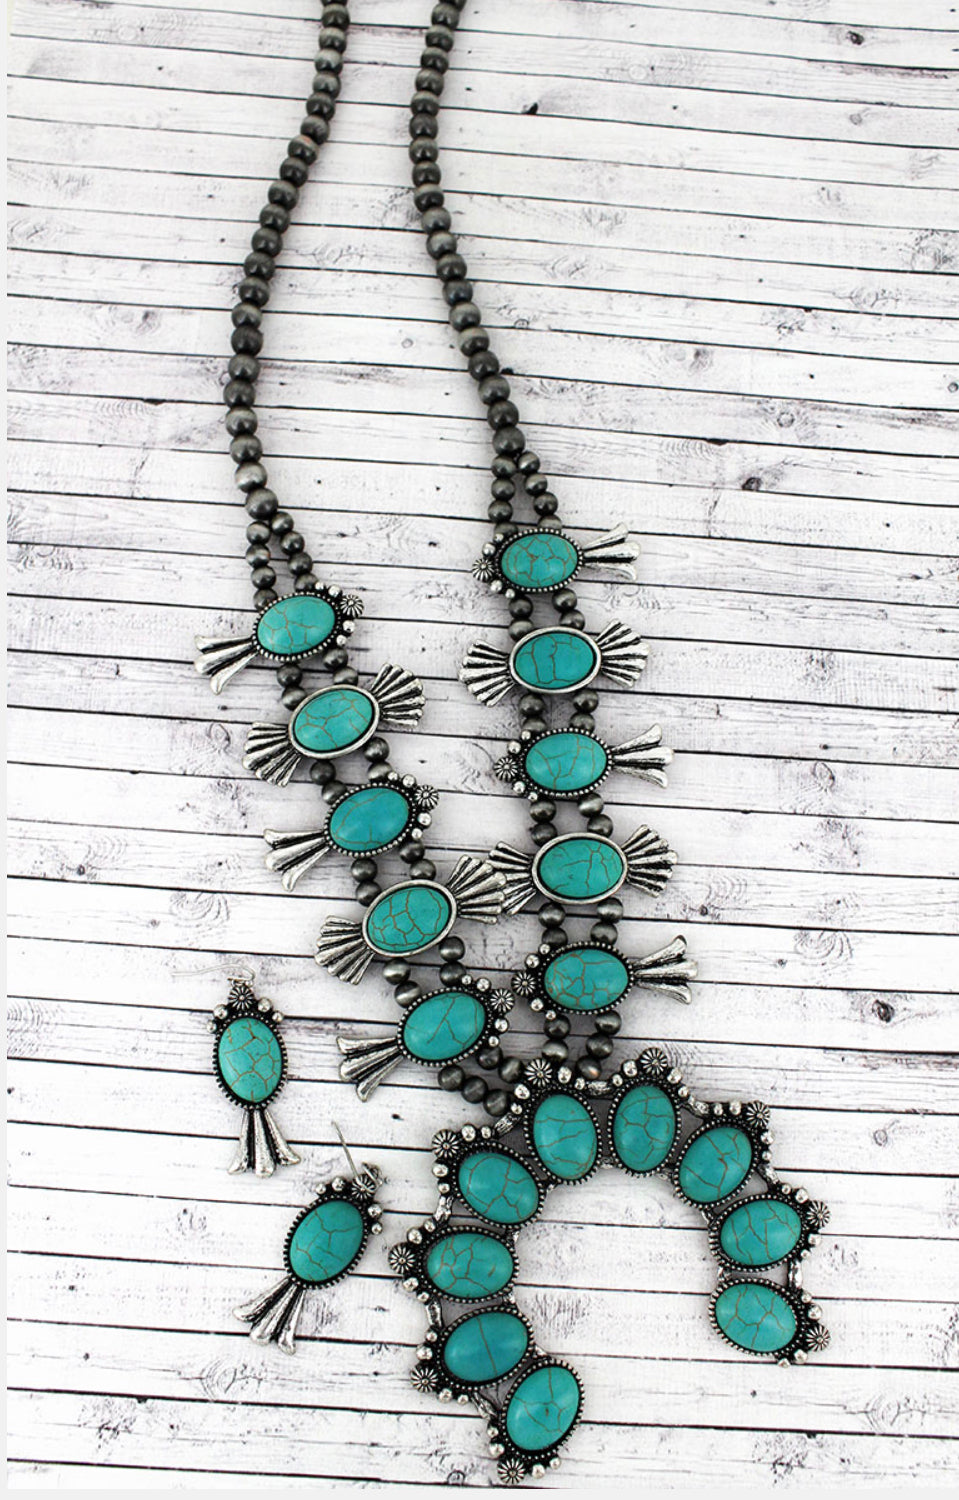 TURQUOISE BEADED SQUASH BLOSSOM SILVER NAVAJO INSPIRED PEARL NECKLACE AND EARRING SET